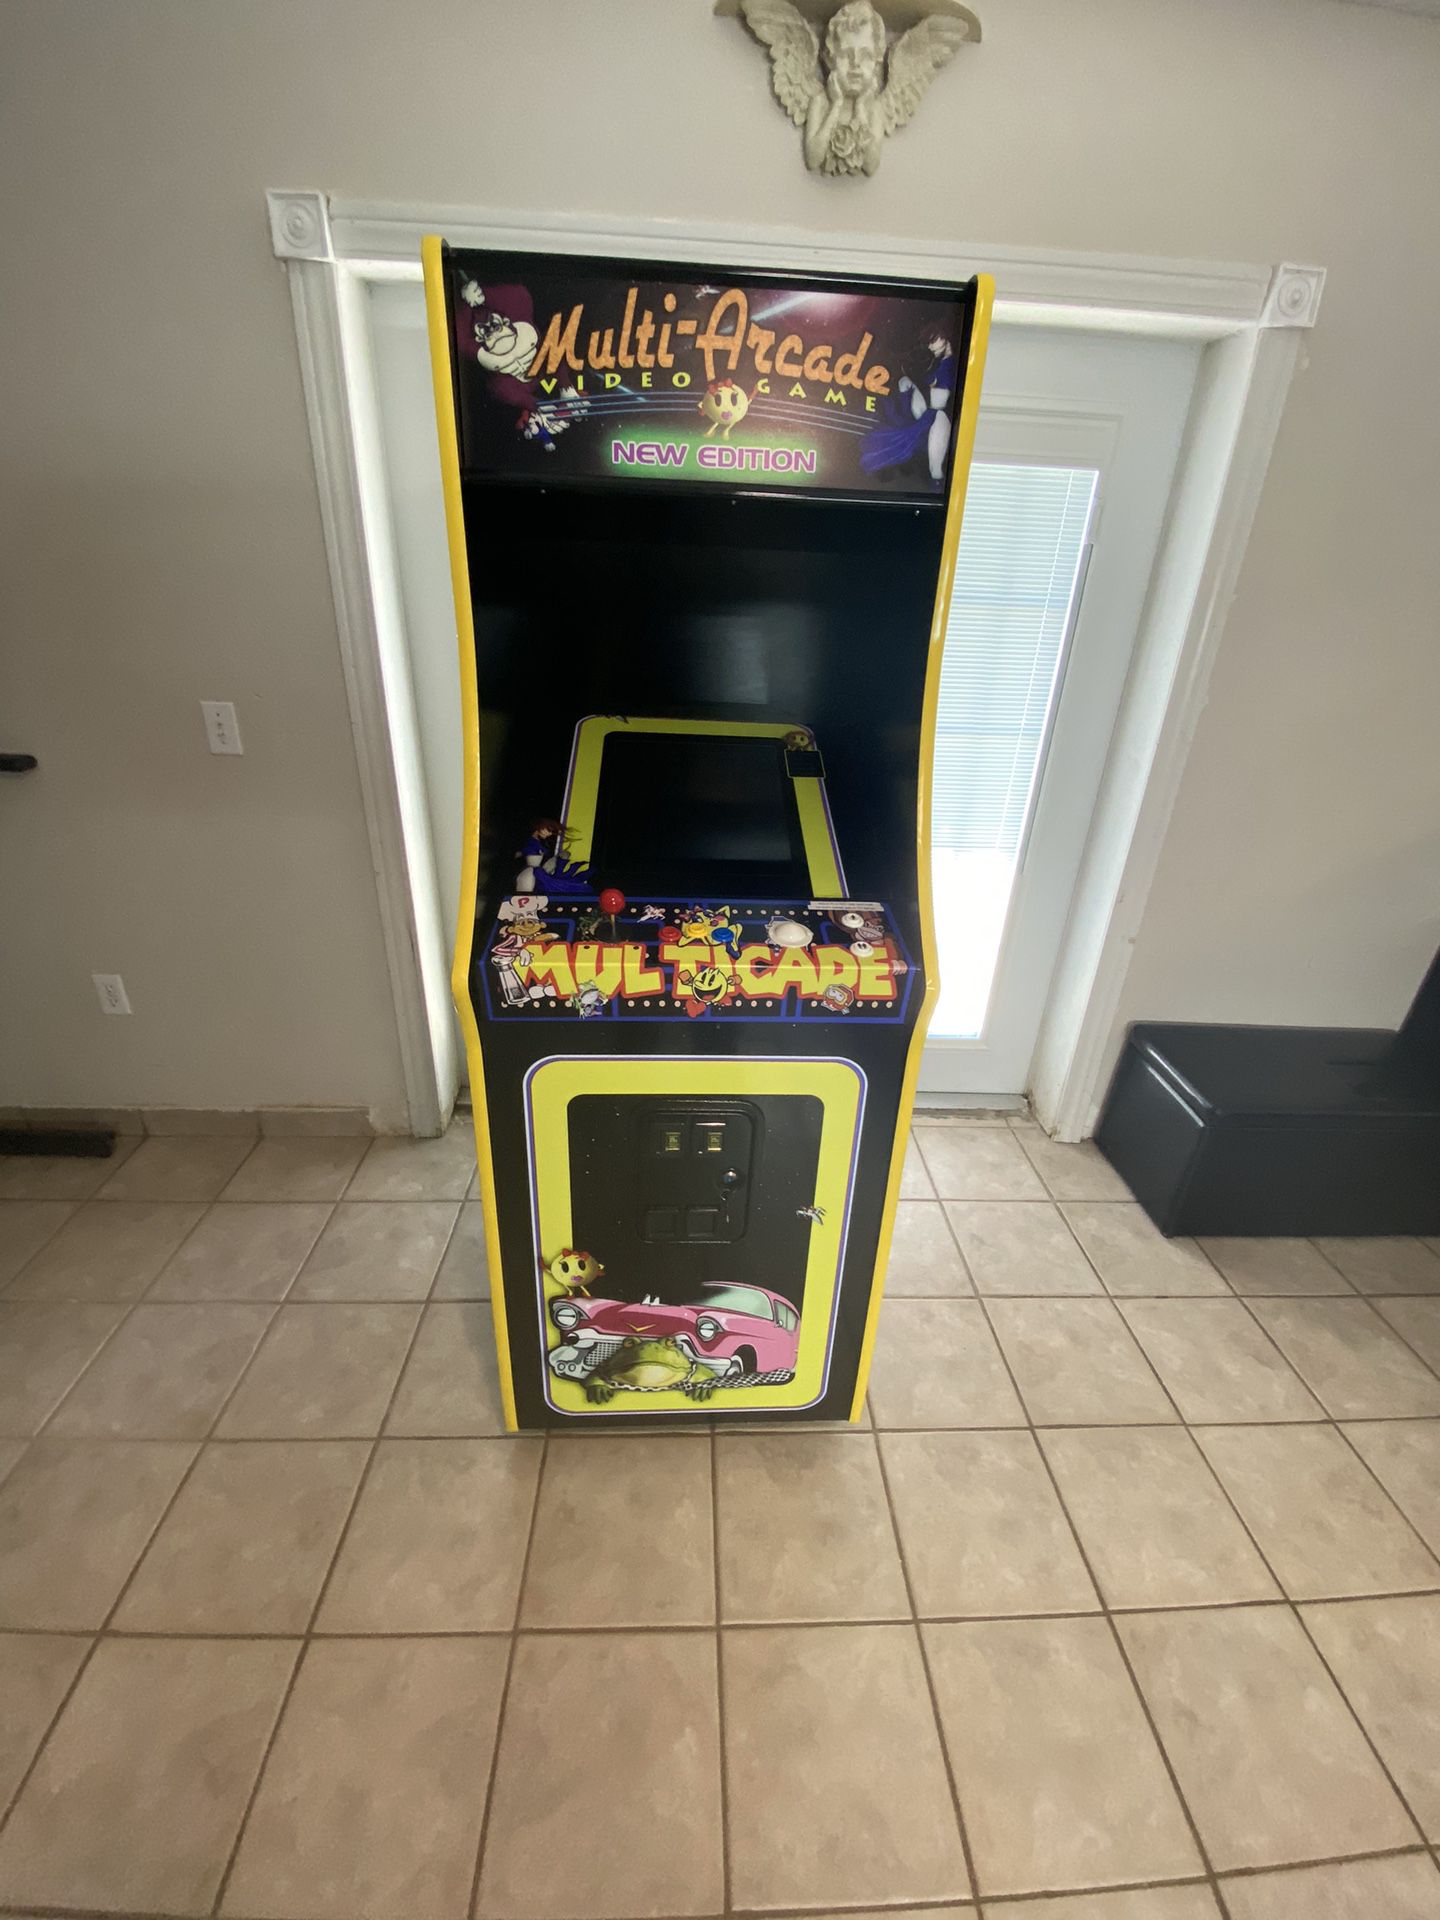 Mulit-Arcade with trackball 412 in 1 Games. Everything new 